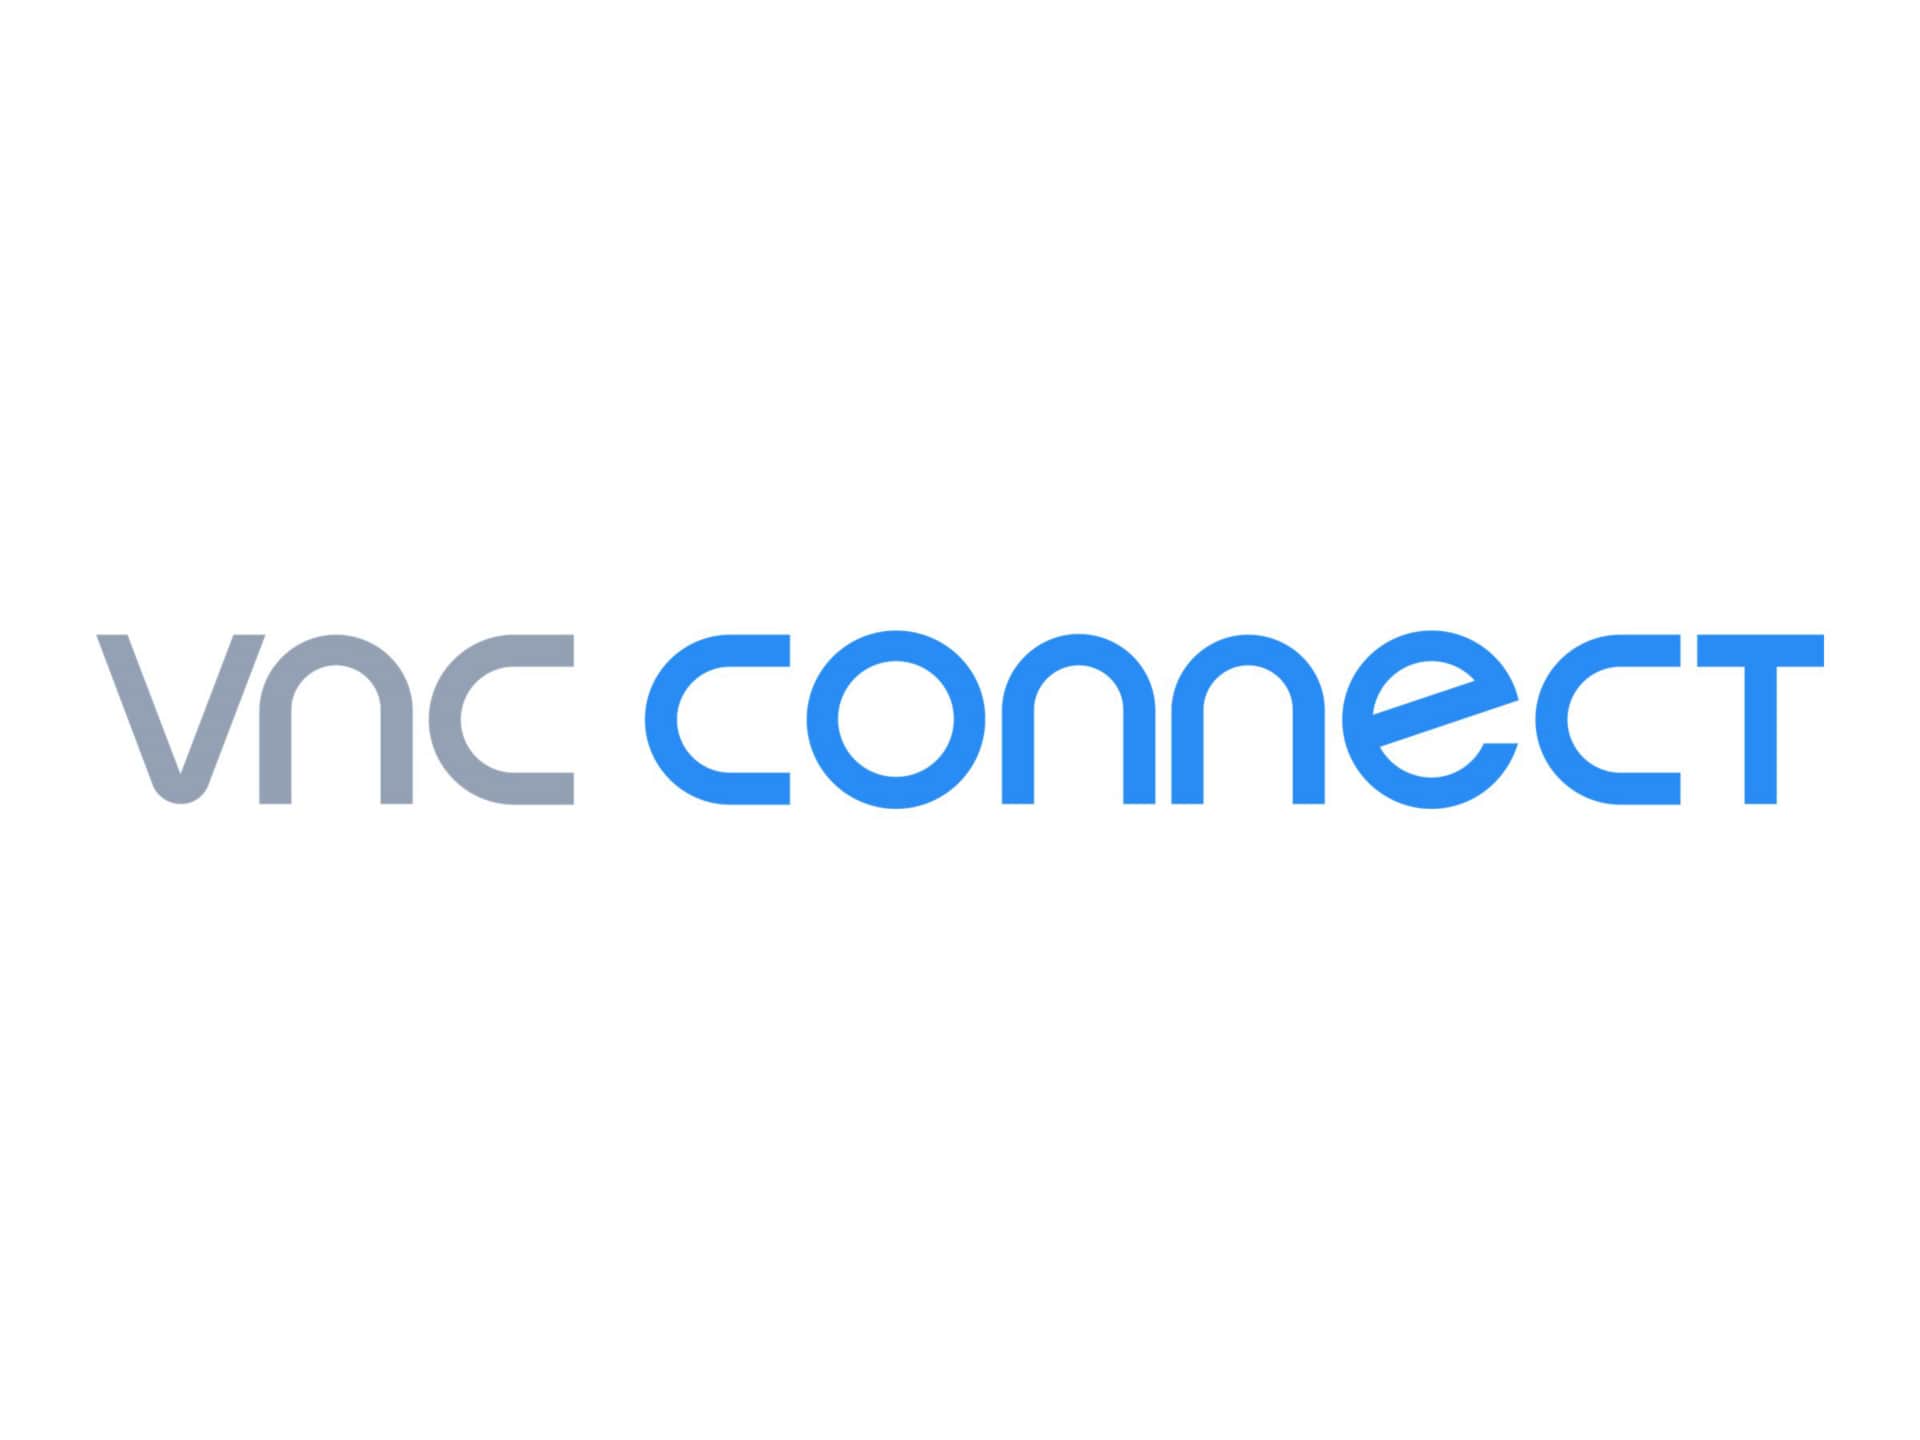 VNC Connect Enterprise - subscription license (1 year) - unlimited users, 5 computers